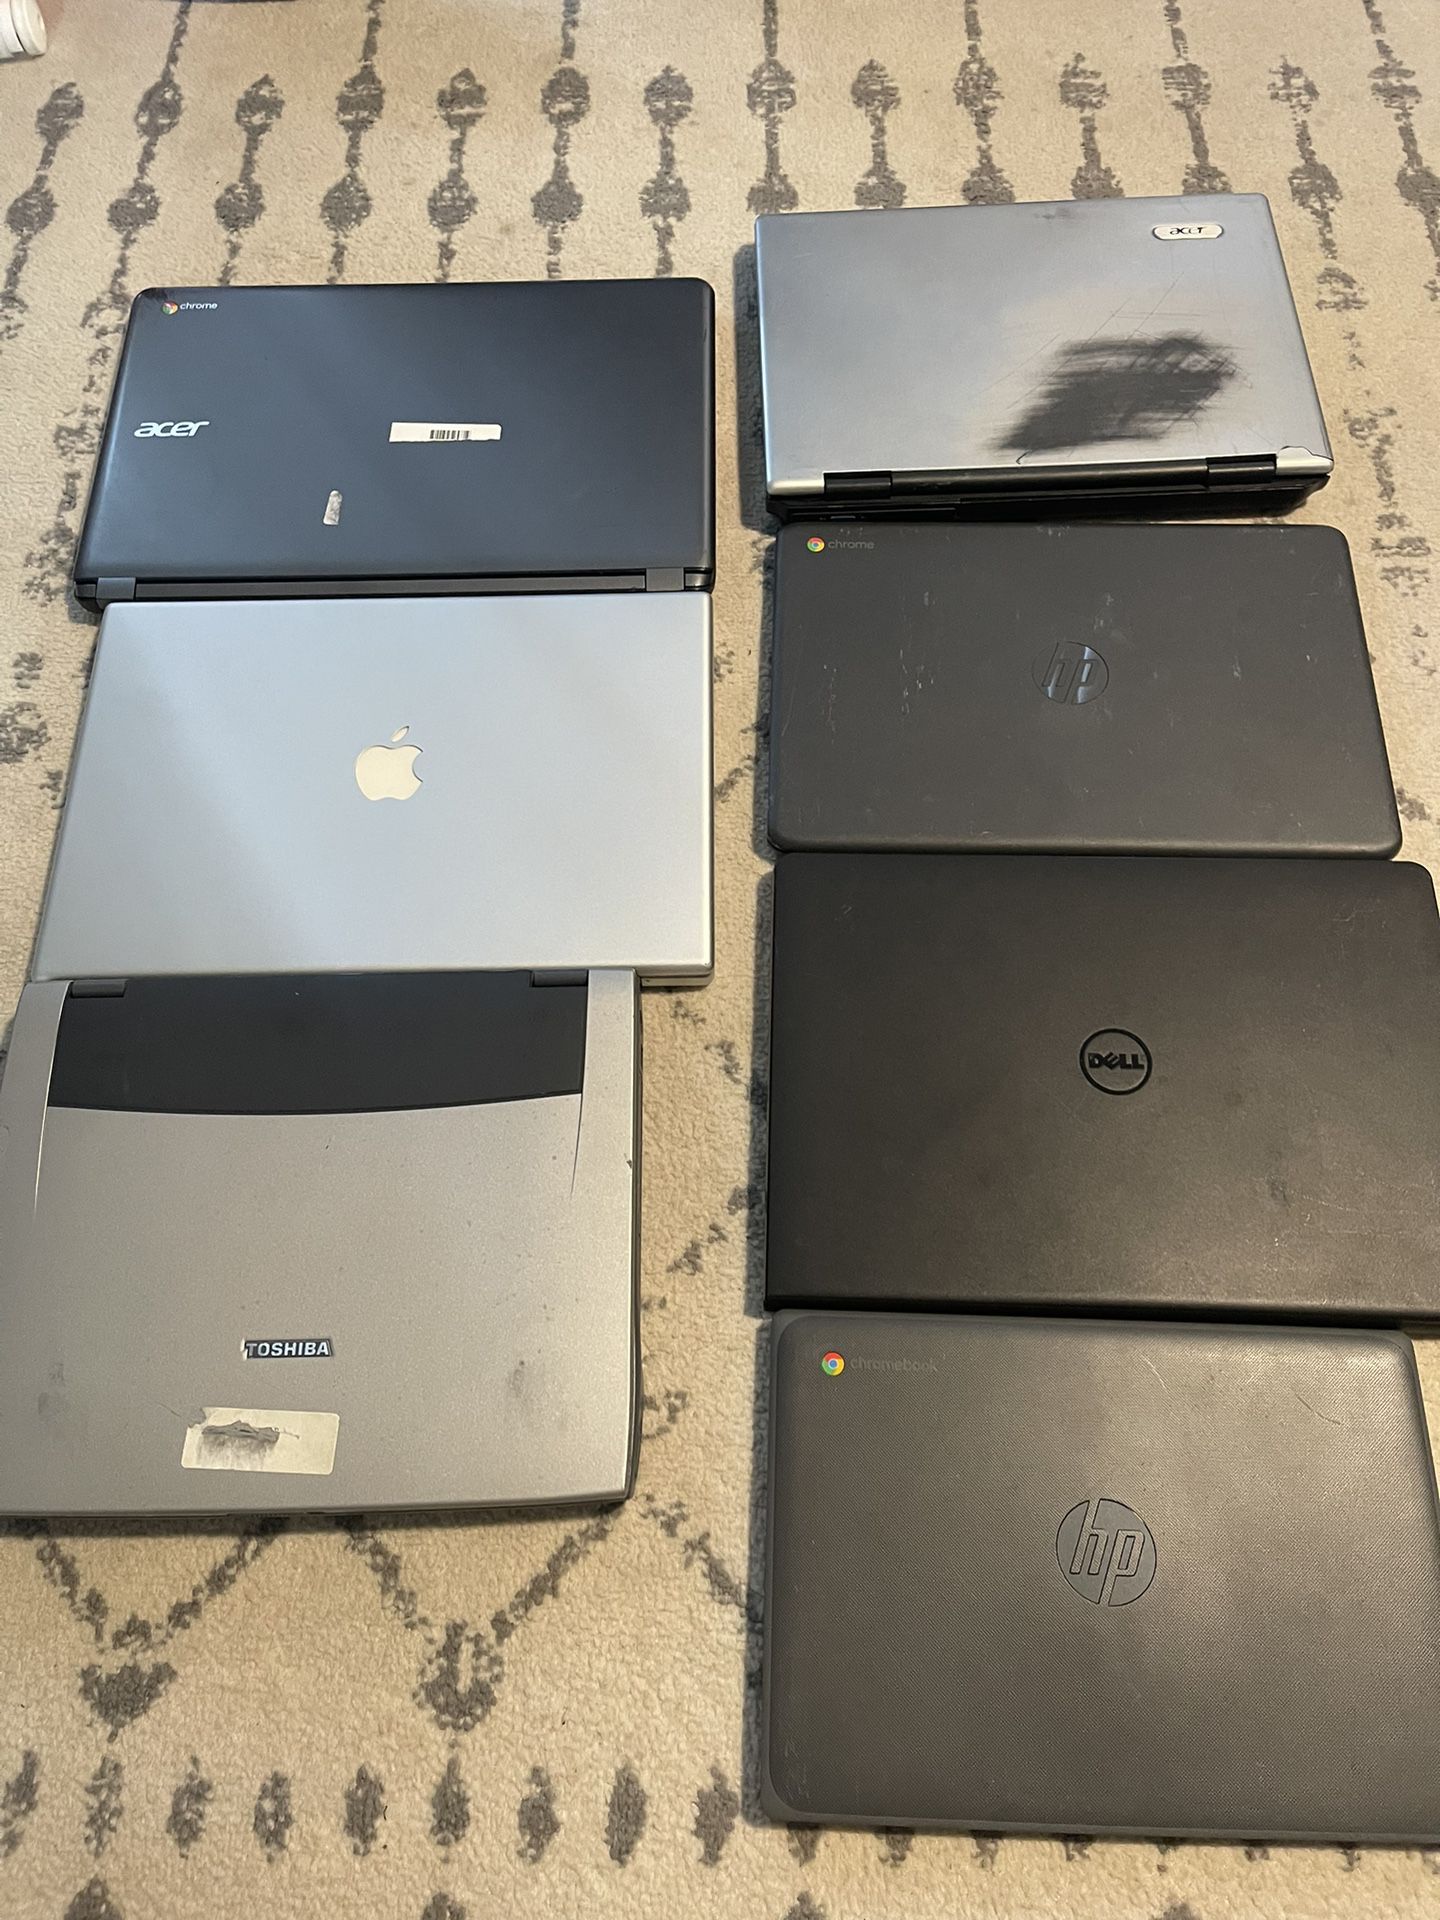 7 laptops and Chromebook untested  unknown condition as is with no charger 75$ for all Pickup in upland, California 